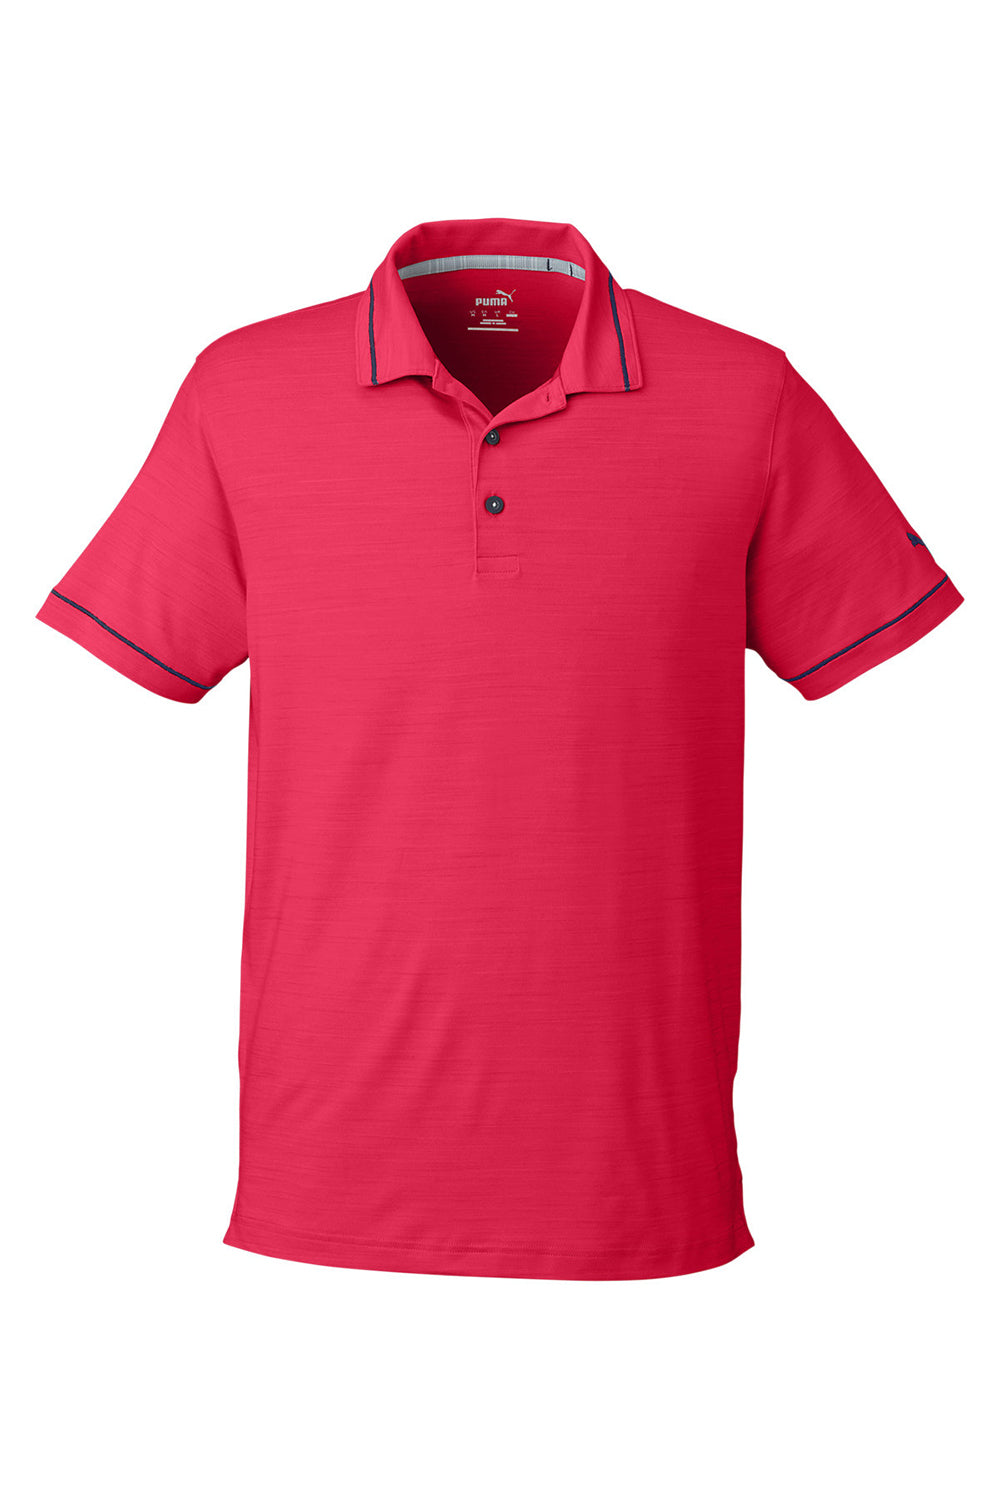 Puma 599117 Mens Cloudspun Monarch Short Sleeve Polo Shirt Heather Teaberry Red/Navy Blue Flat Front